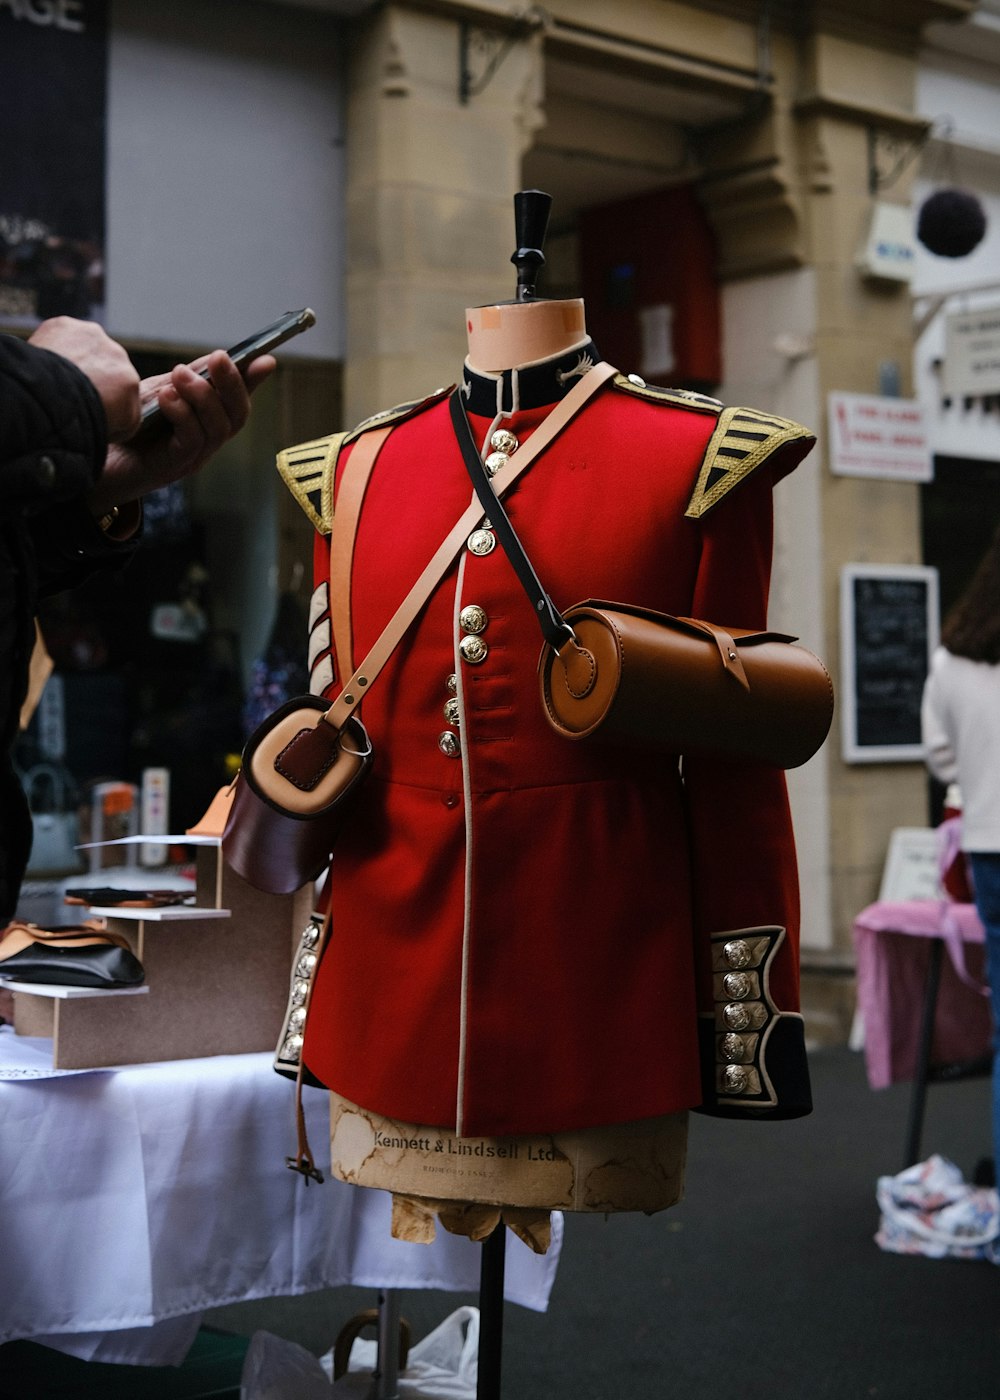 a red uniform on display in a store